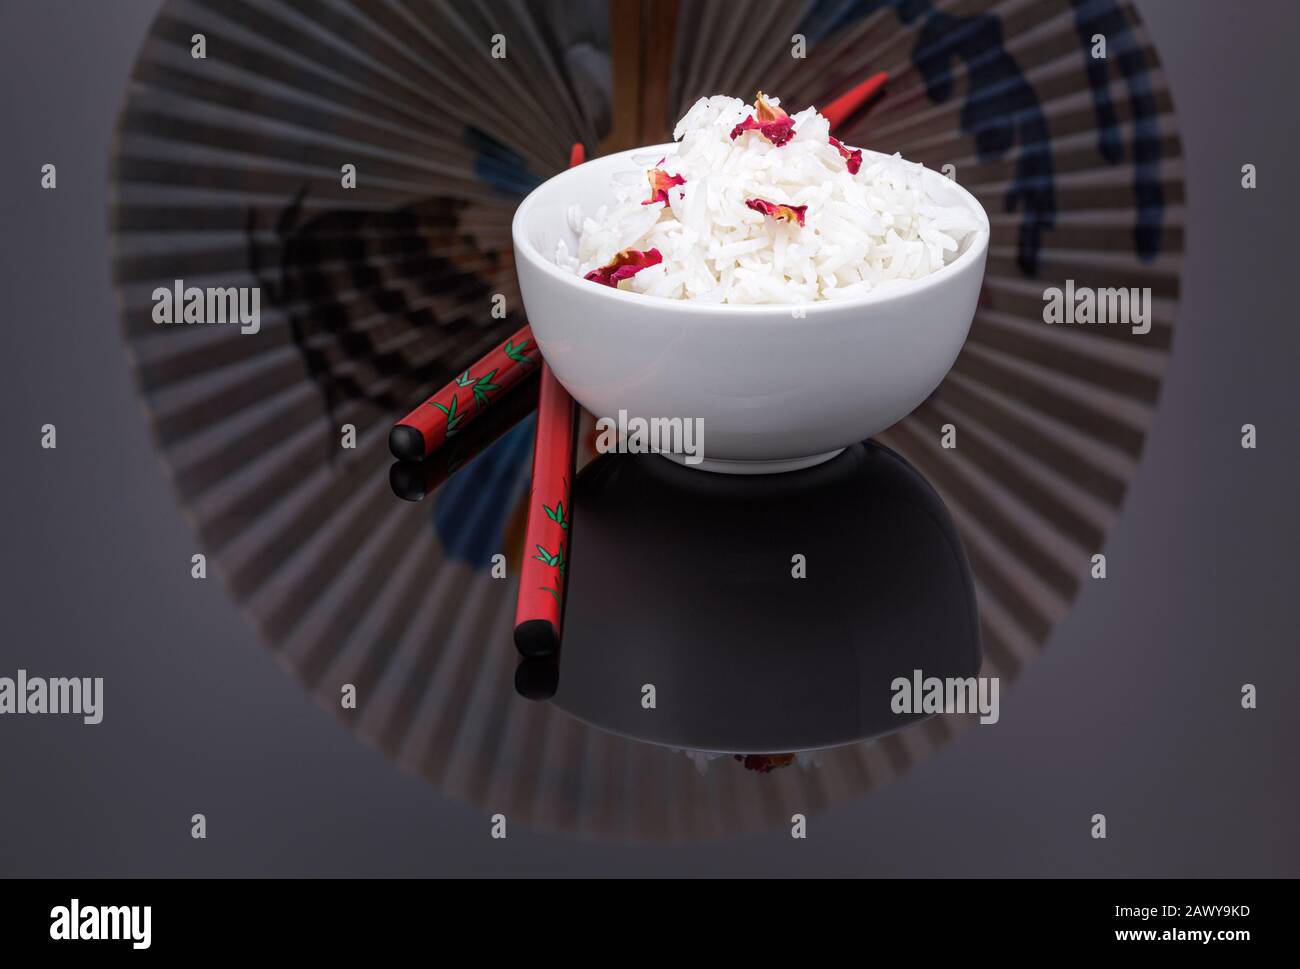 Bowl of cooked white rice garnished with edible rose petals Stock Photo